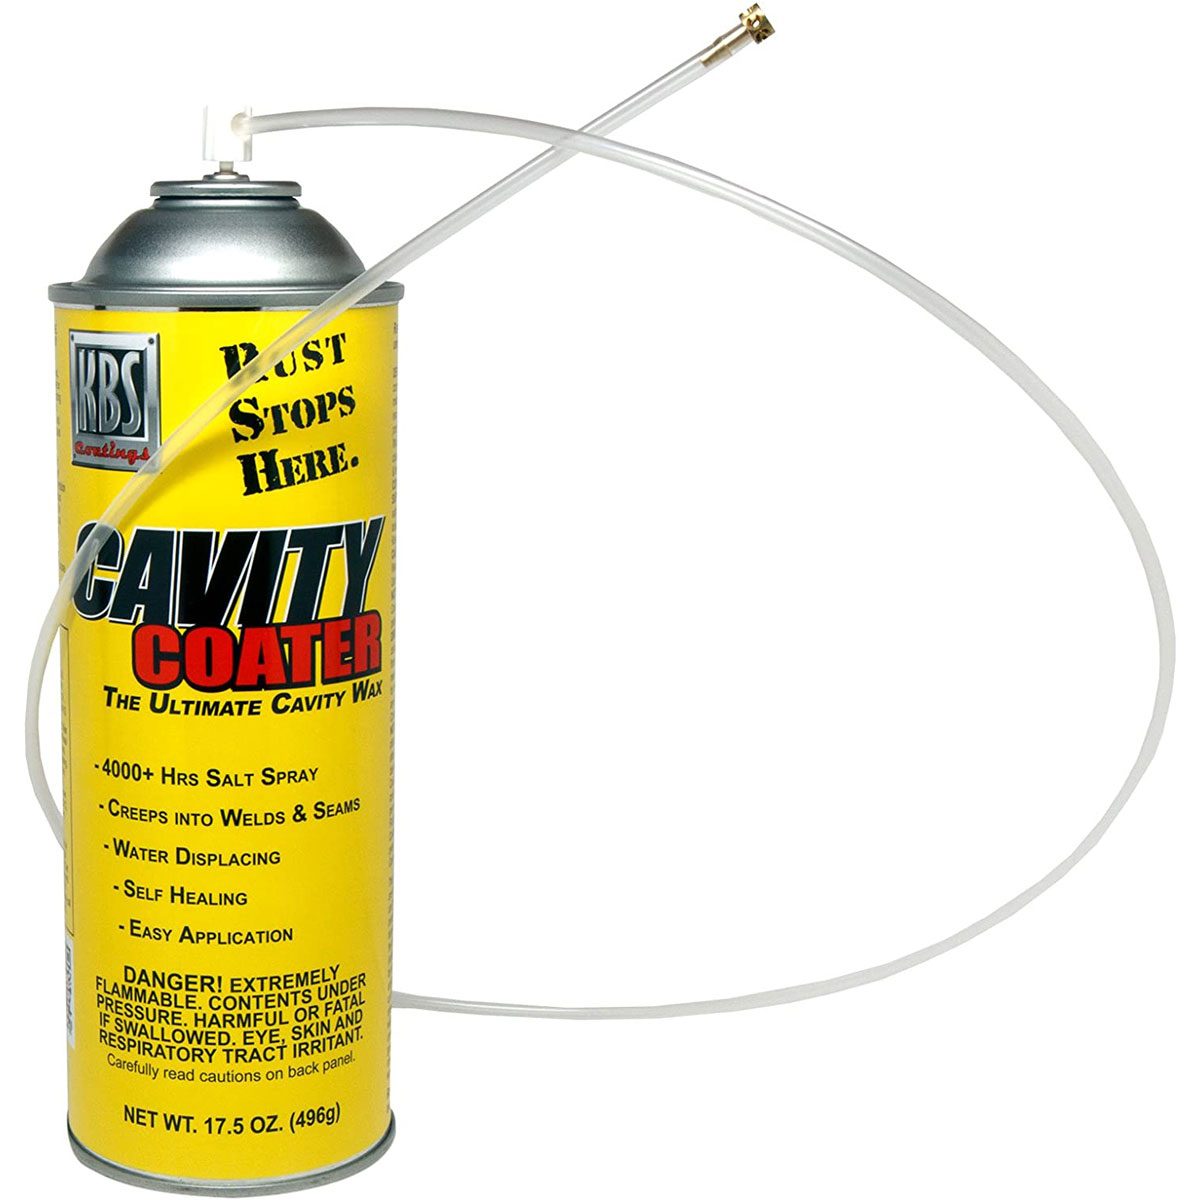 Rust Prevention Spray On Solution Now Available to Retail Consumers -  Zerust Rust Prevention Products